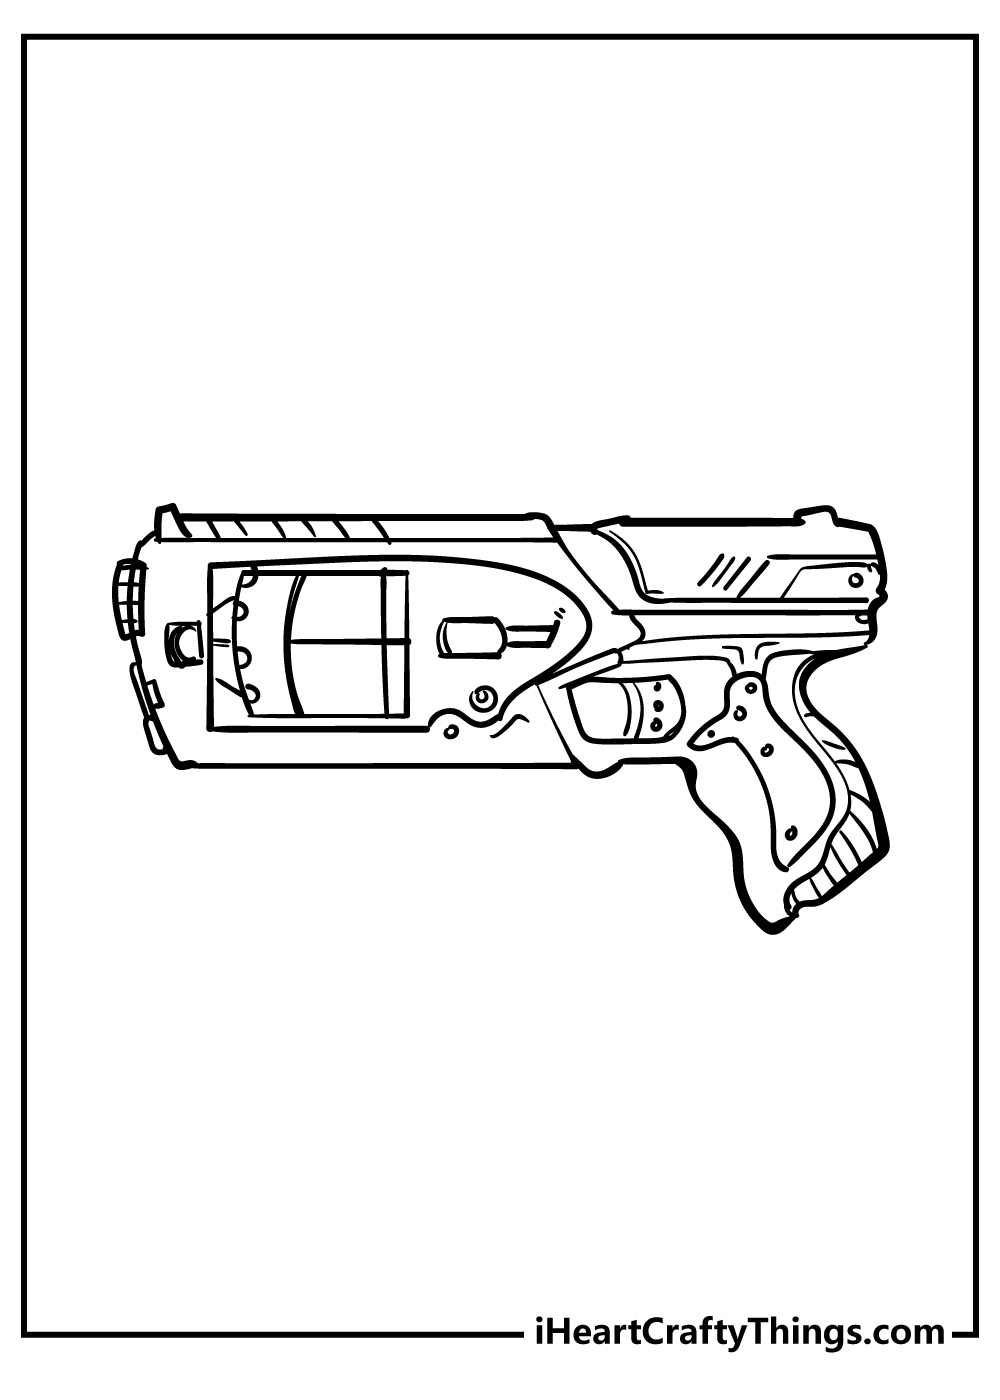 Nerf Gun Coloring Pages for adults free printable